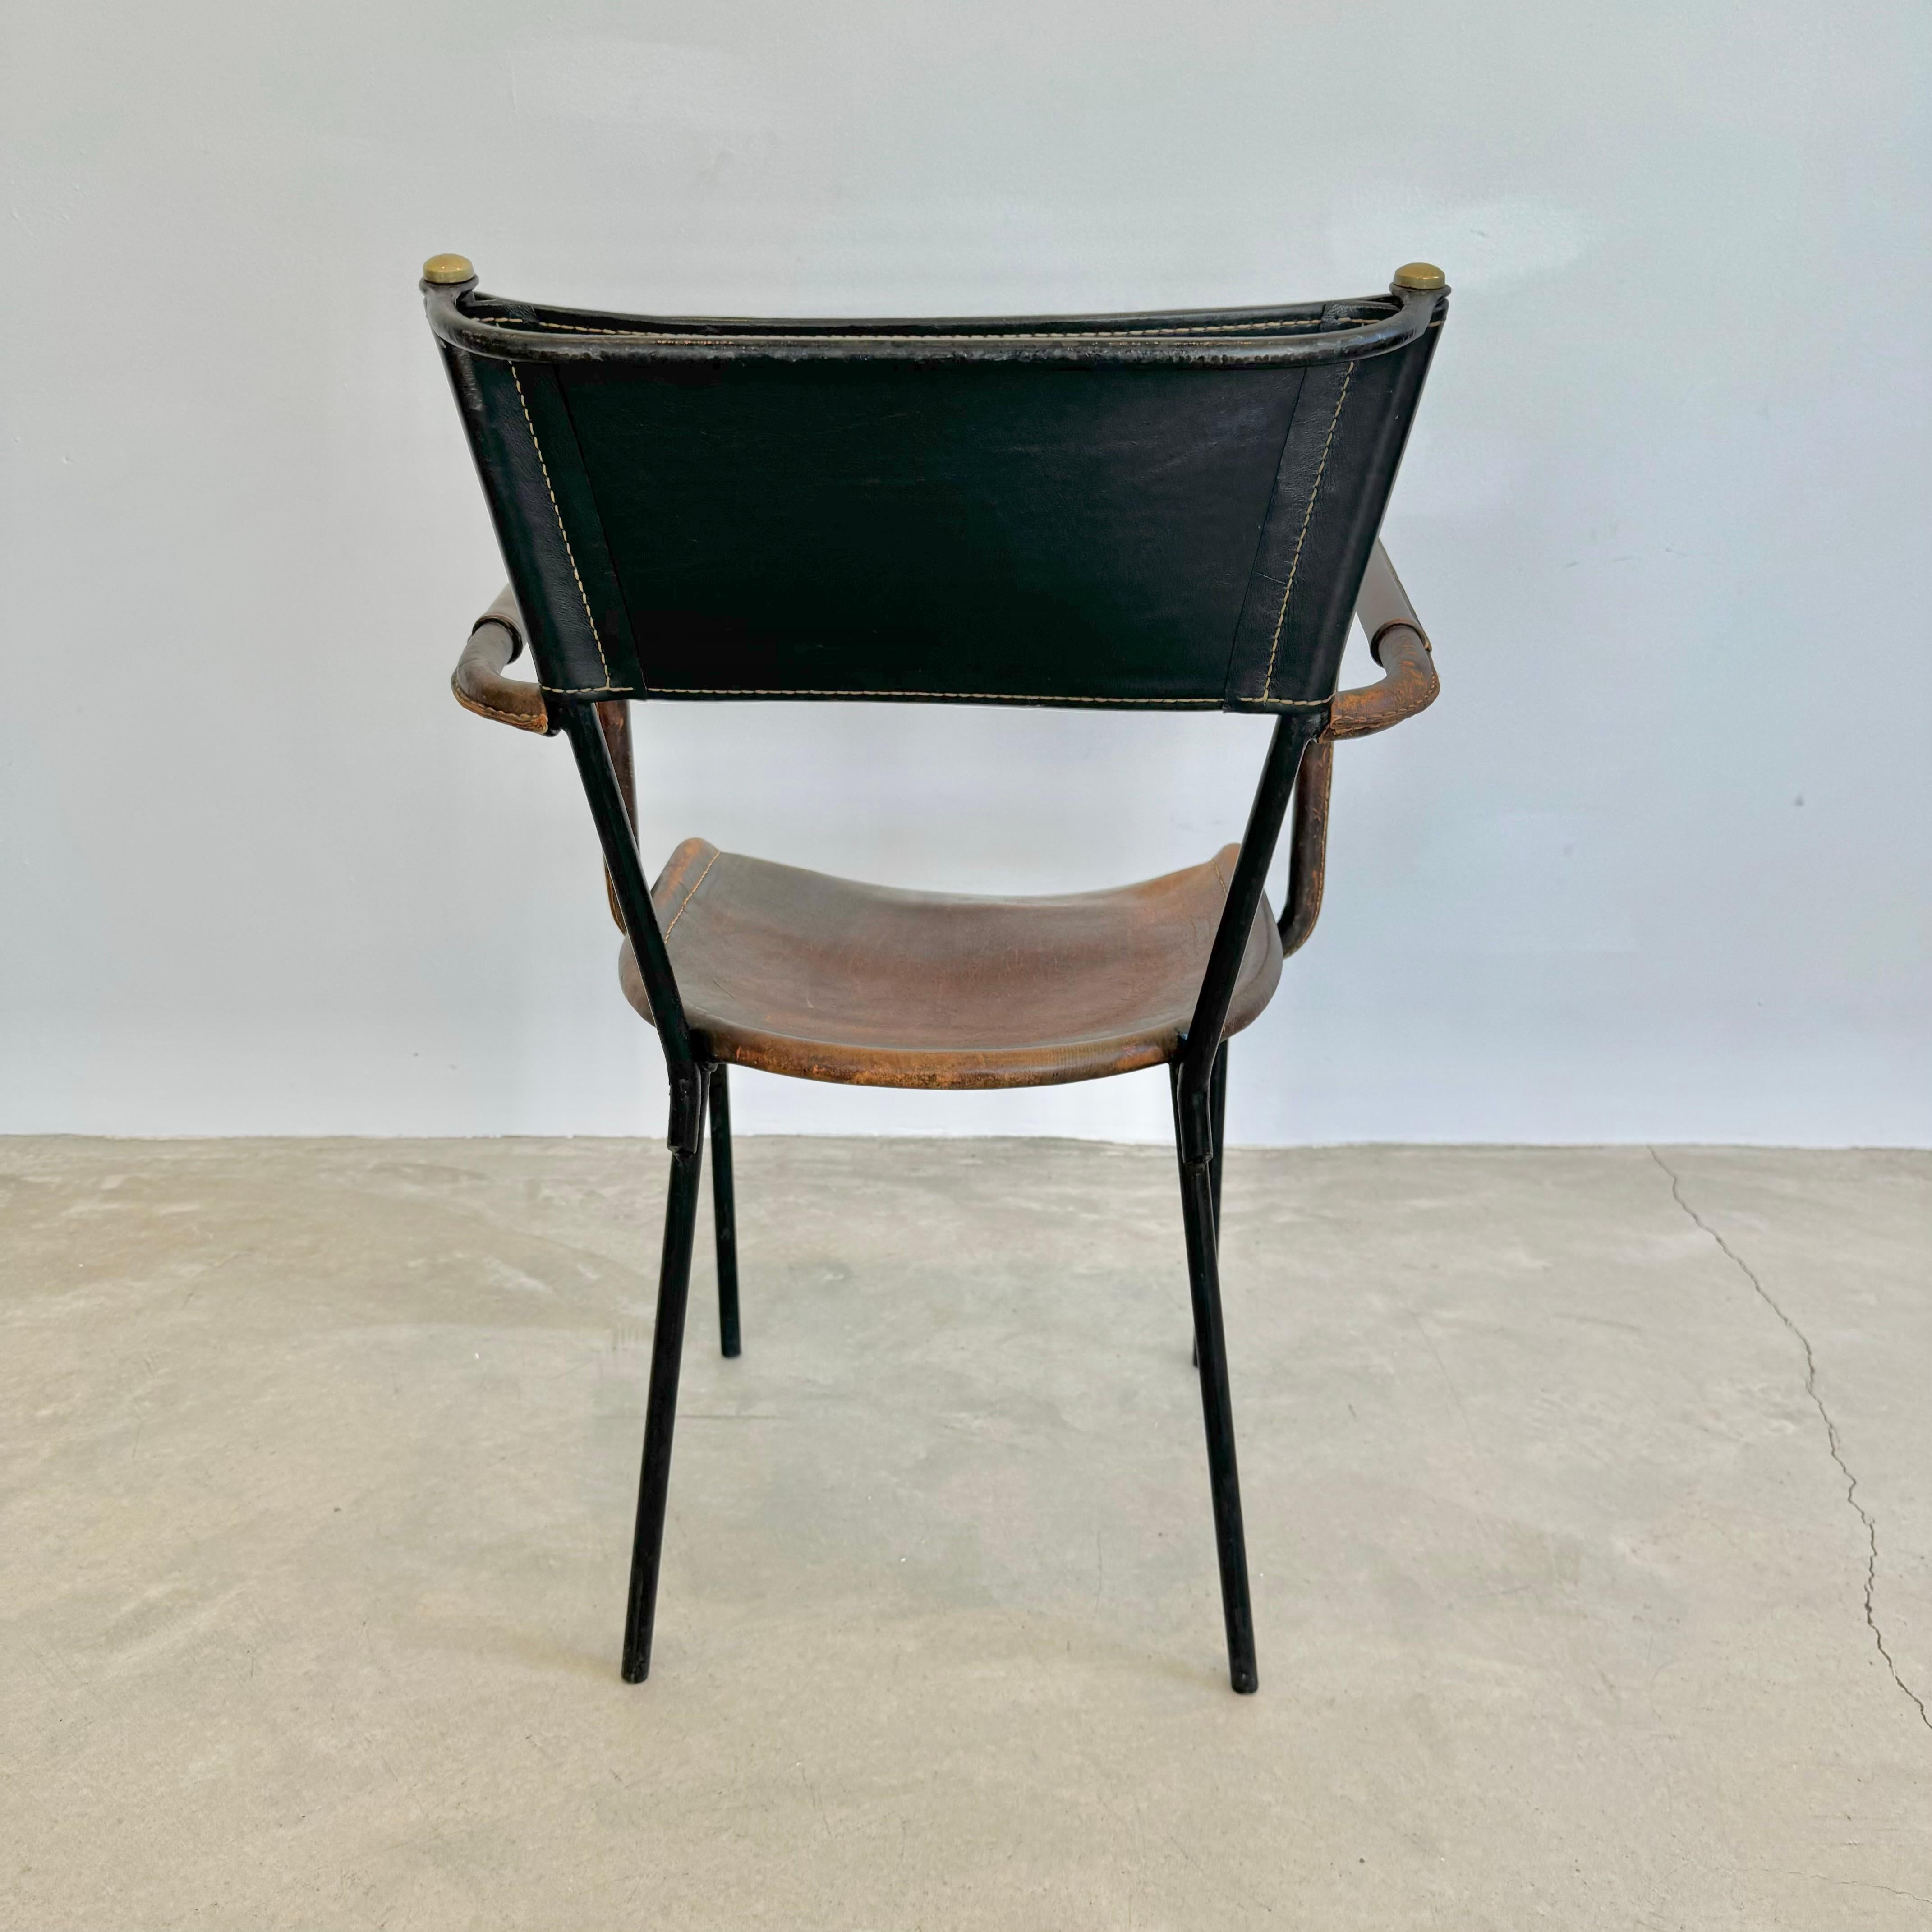 Jacques Adnet Sculptural Leather Armchair, 1950s France For Sale 5